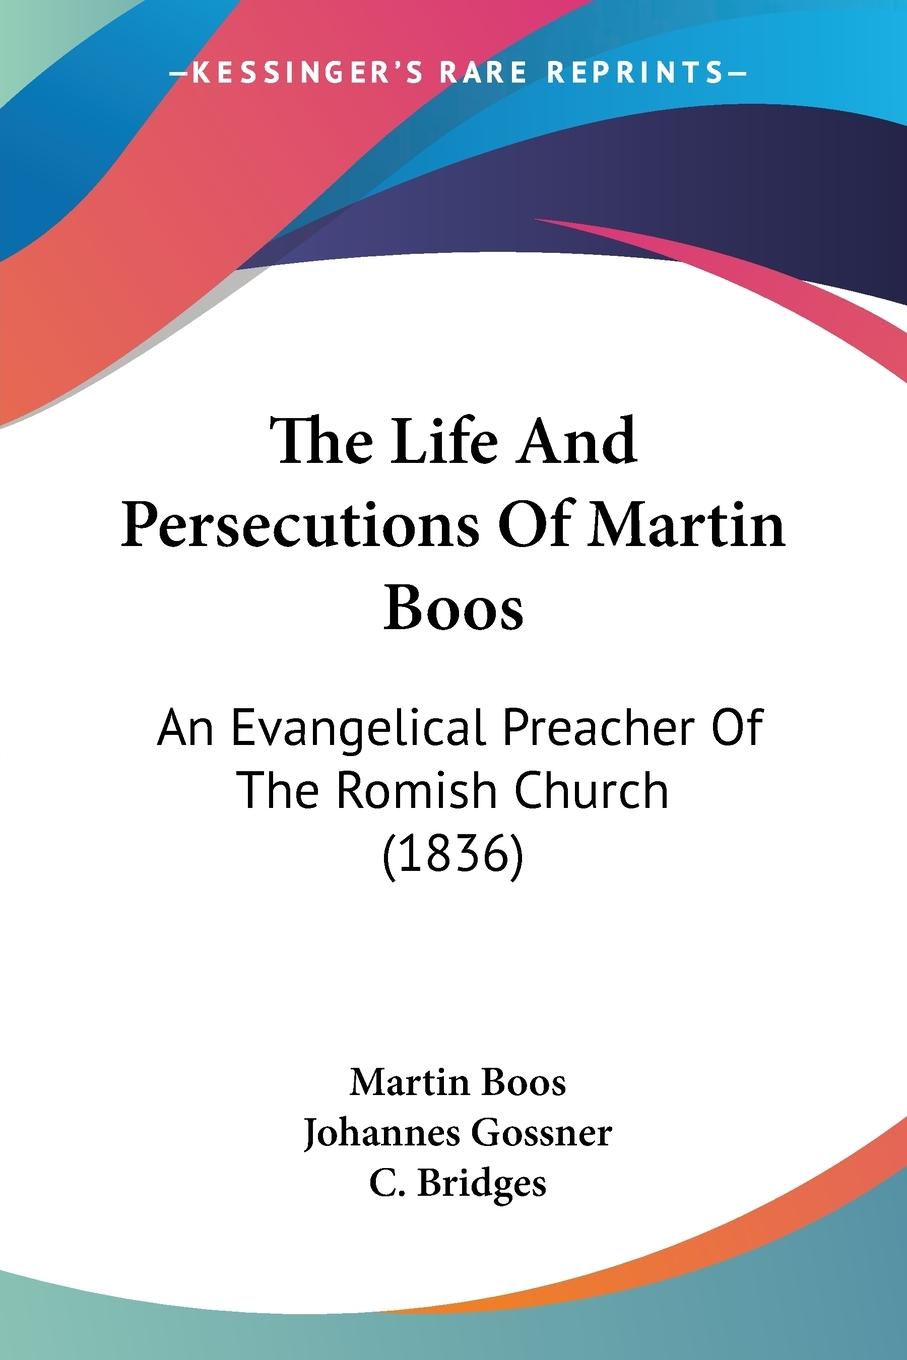 The Life And Persecutions Of Martin Boos - Boos, Martin